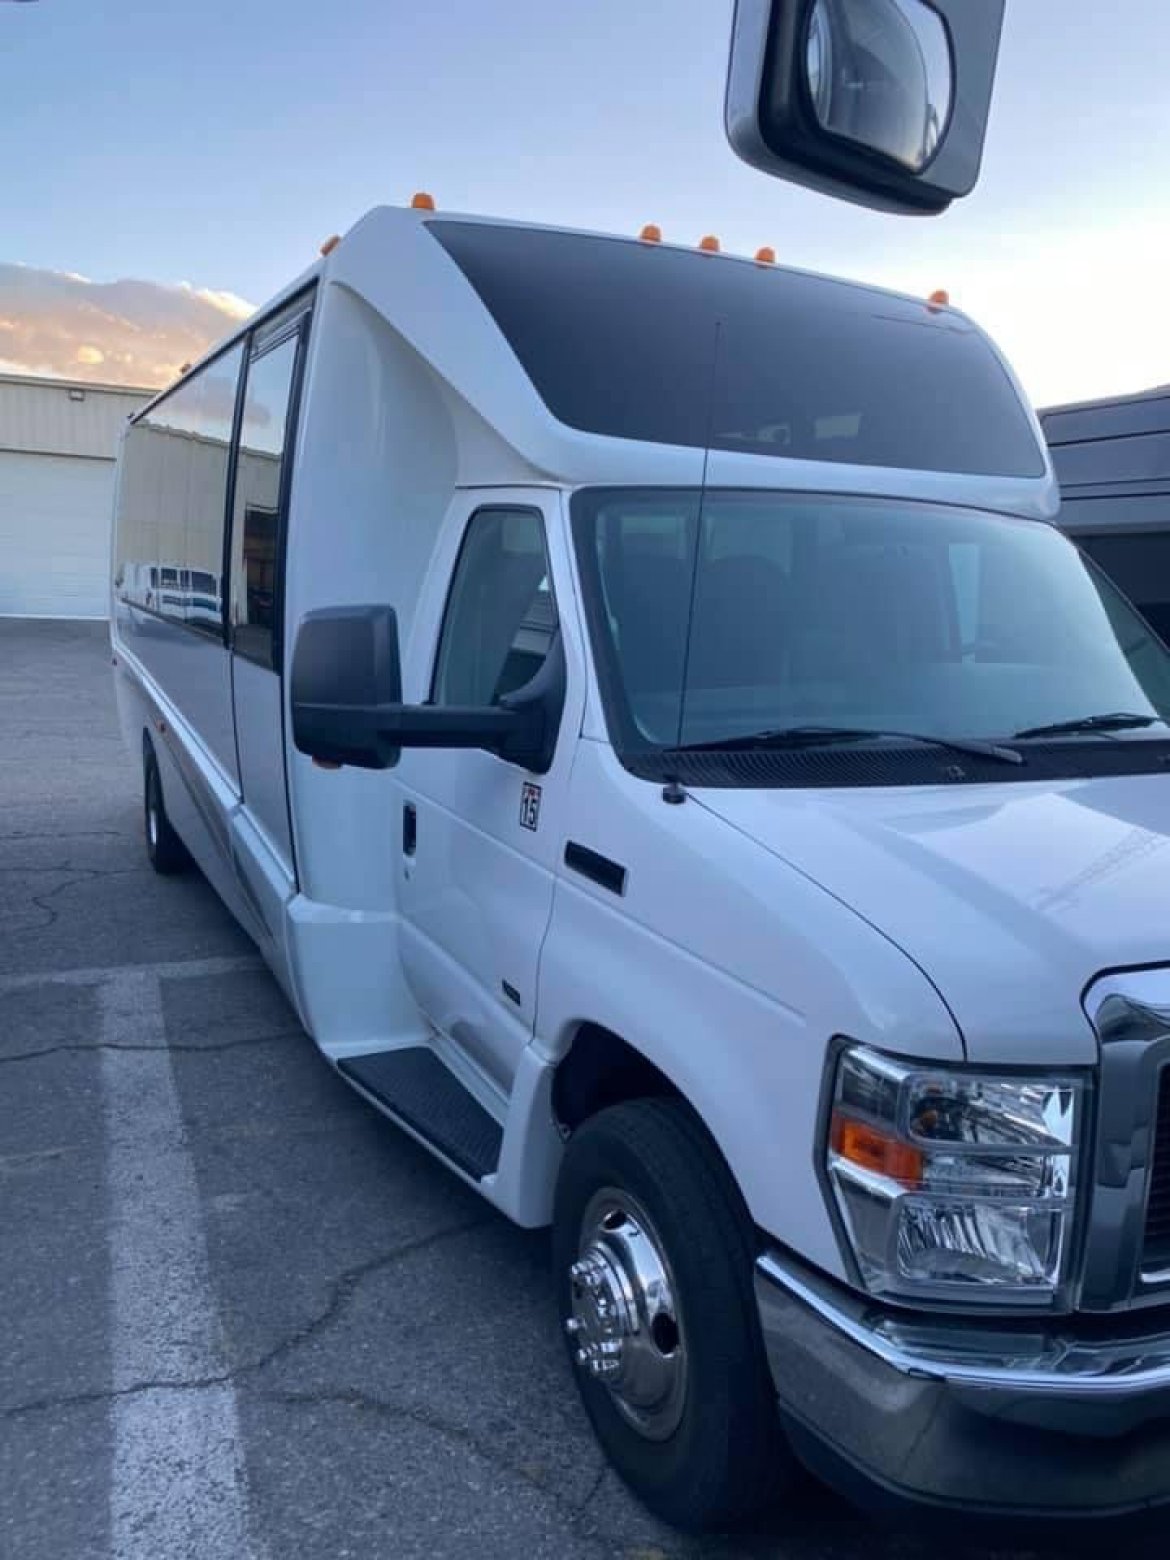 Executive Shuttle for sale: 2016 Ford E-450 by Grech Coach Builder